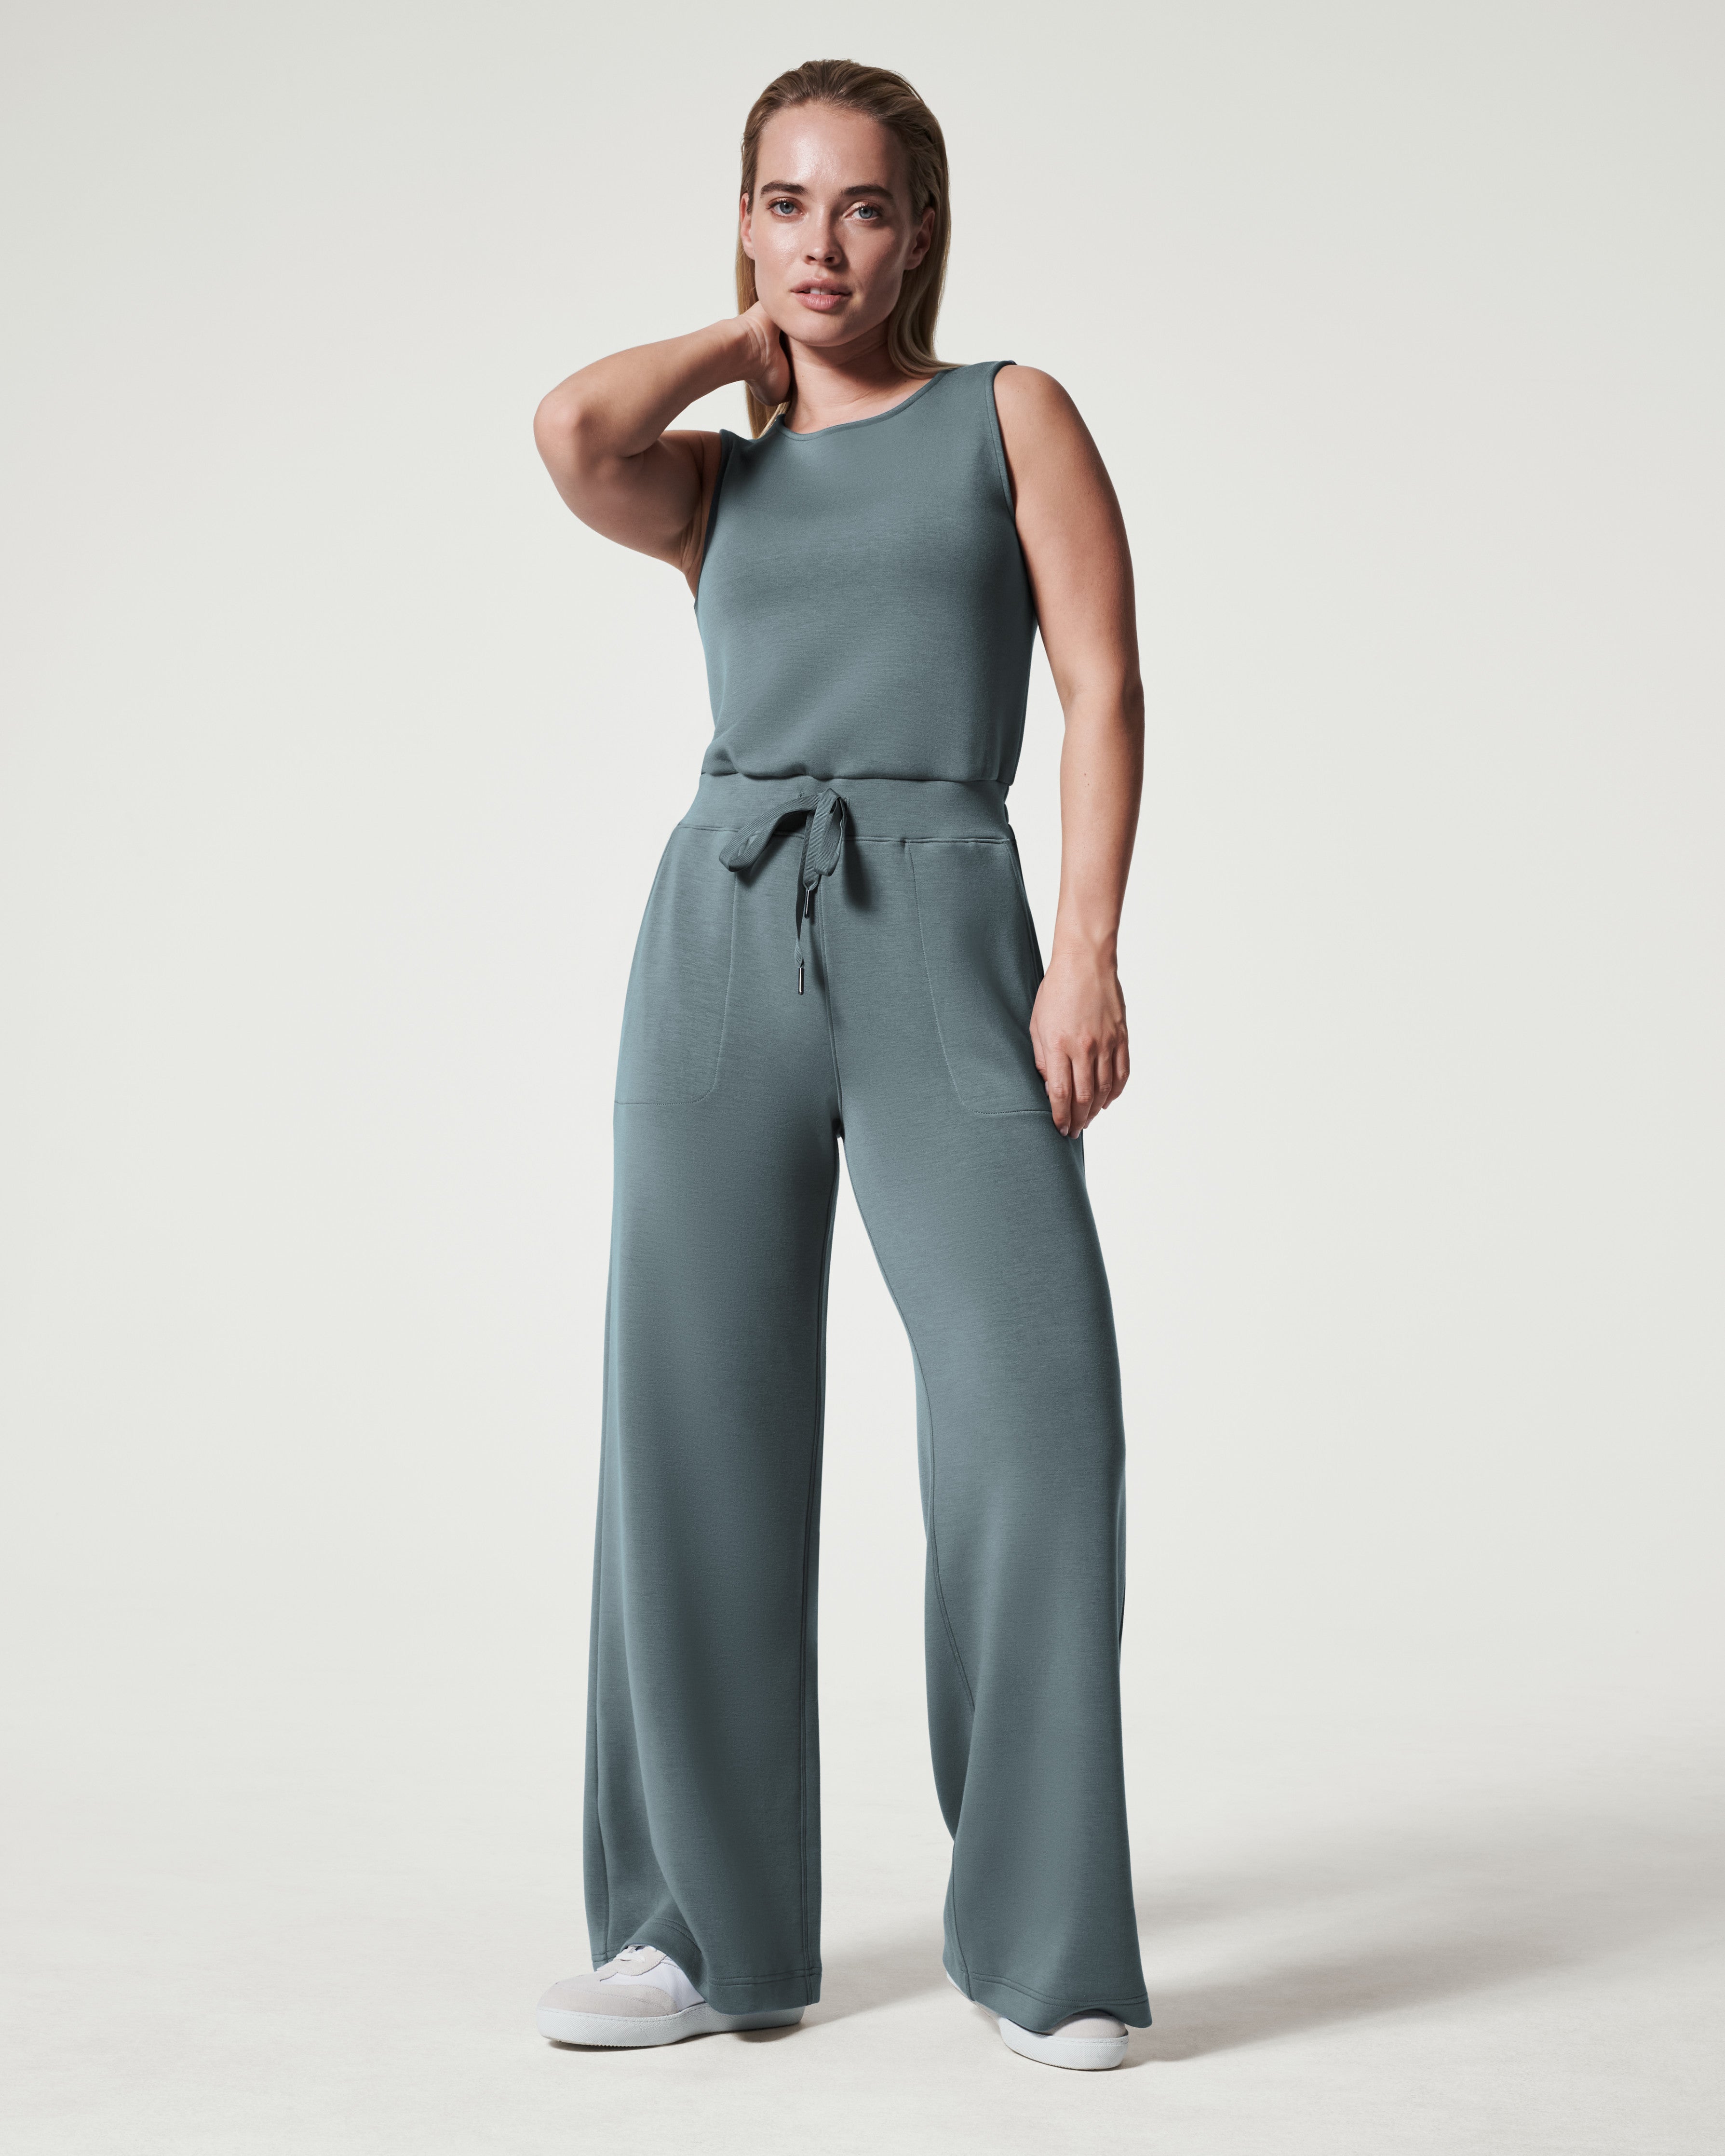 ✨✨ Spanx Air Essentials jumpsuit dupe found on  for